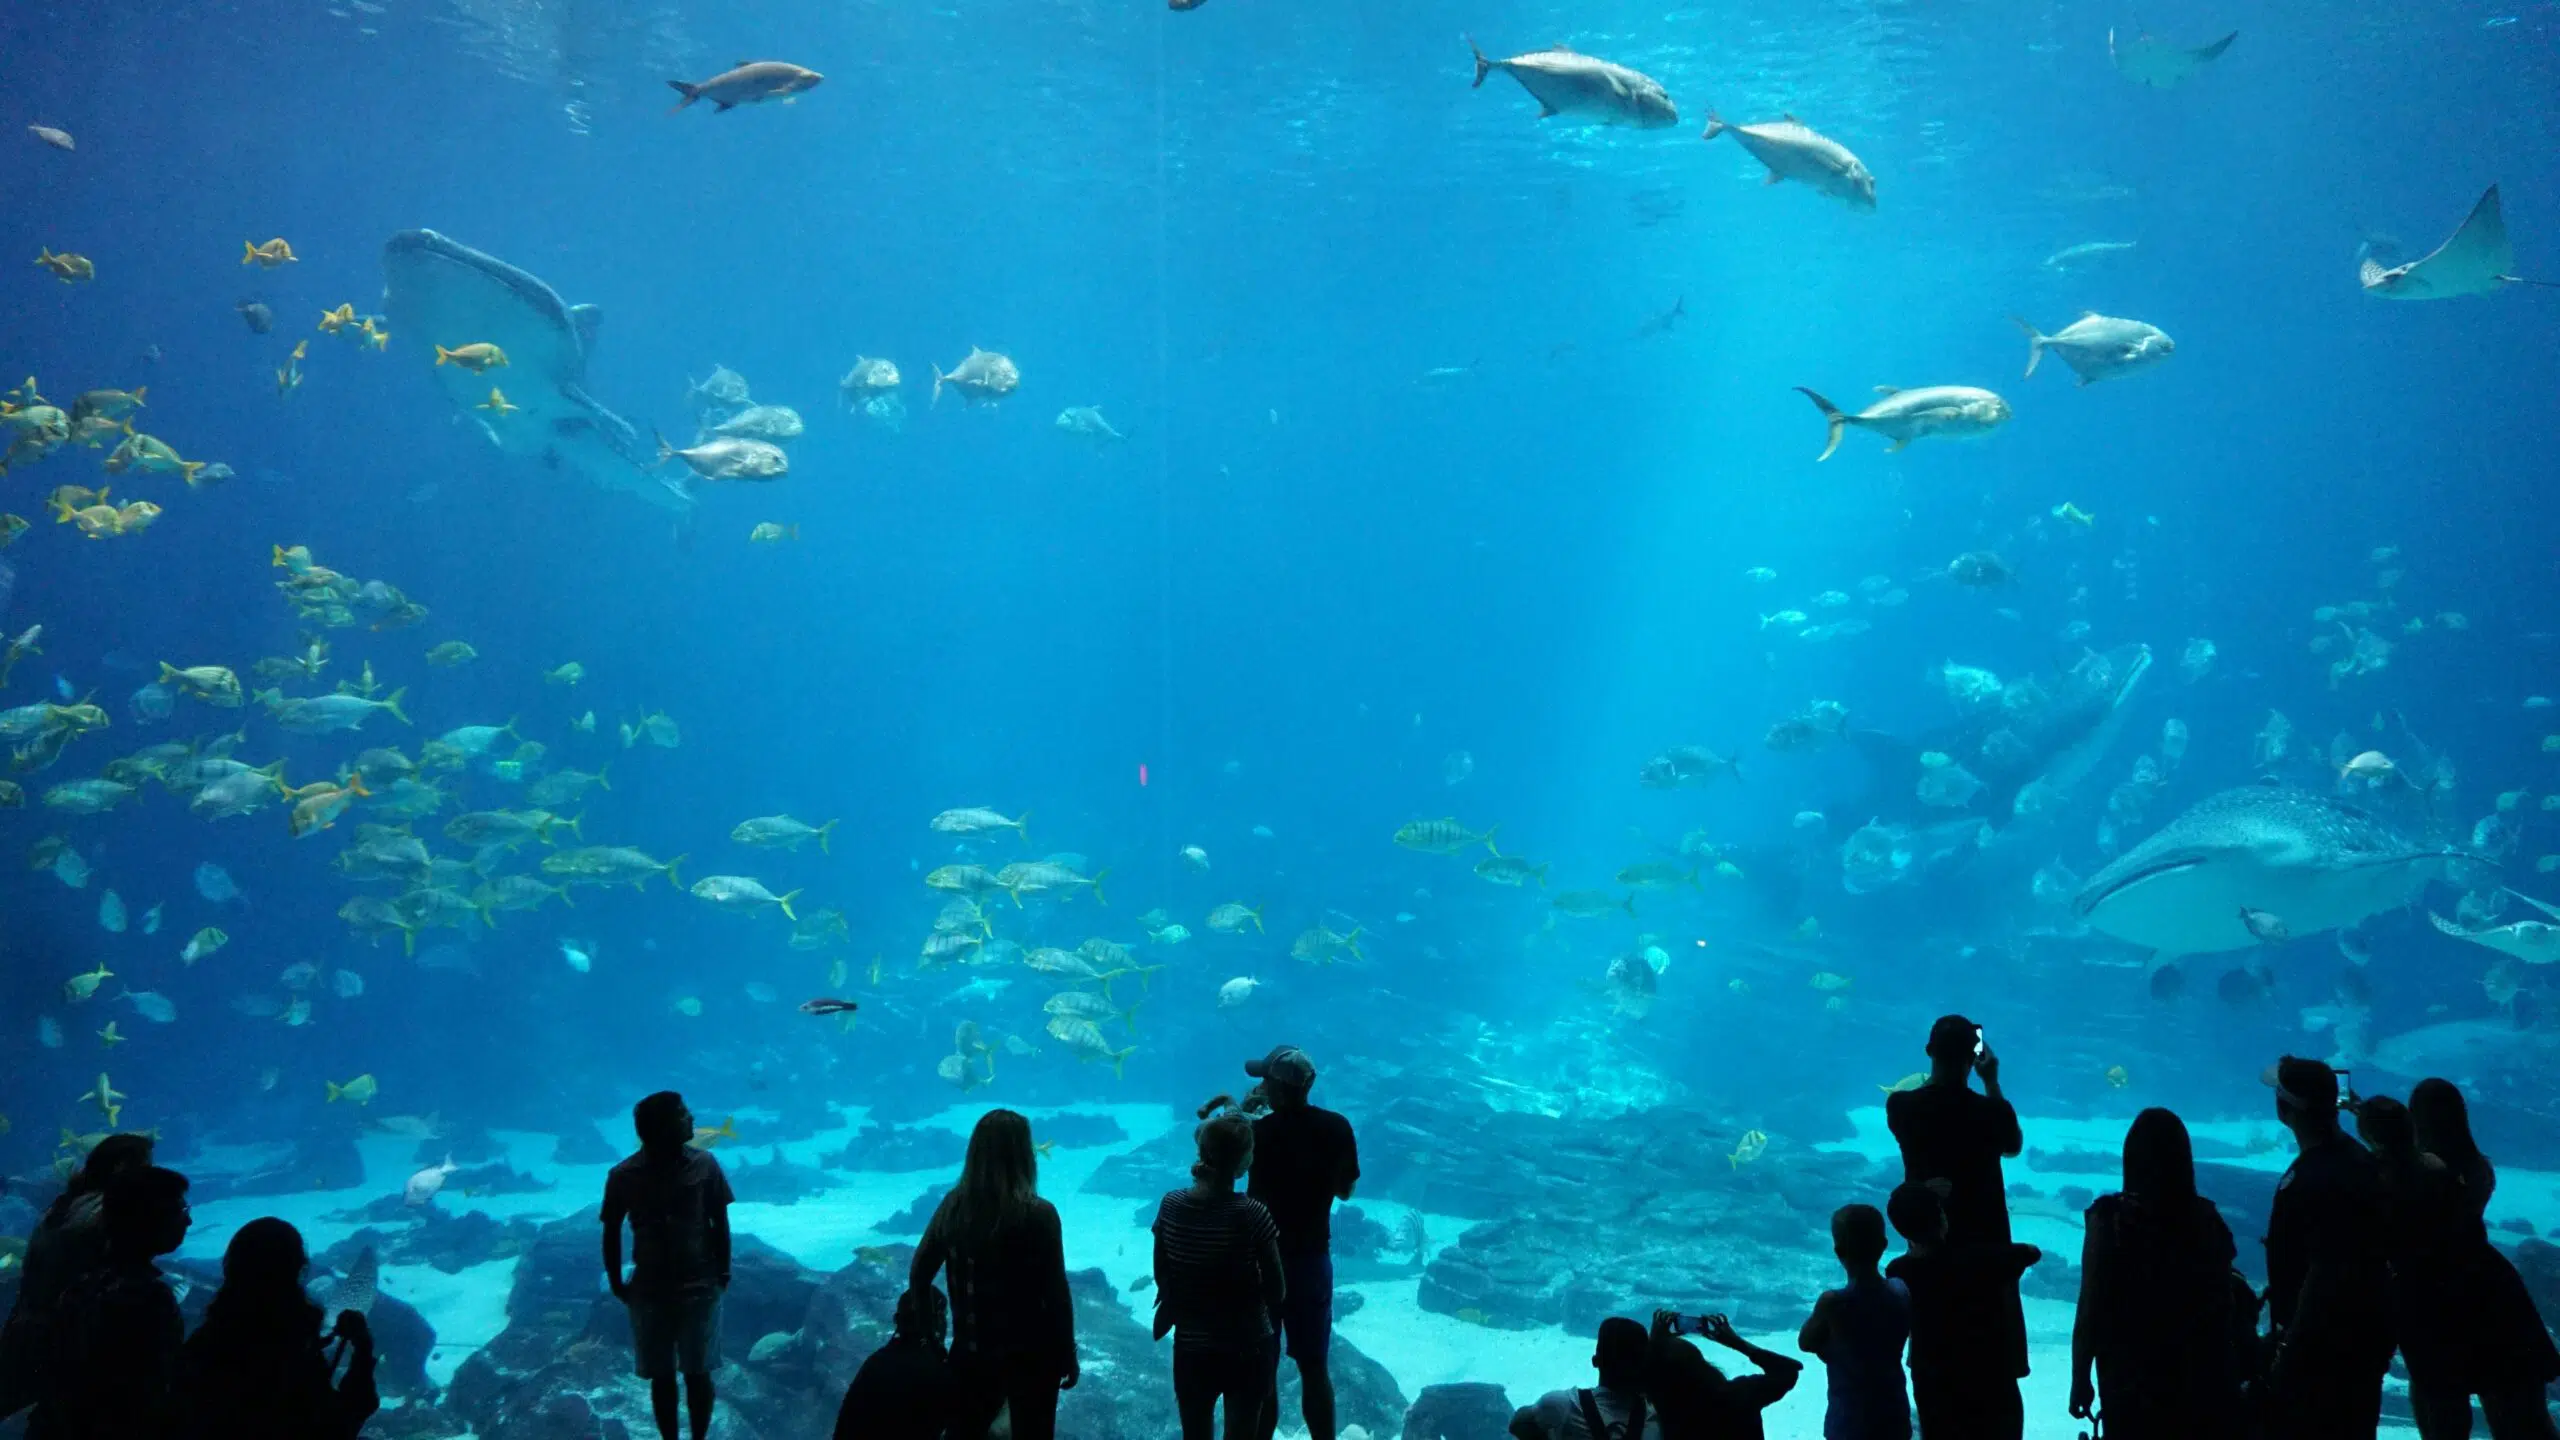 Aquarium with fish, people in foreground